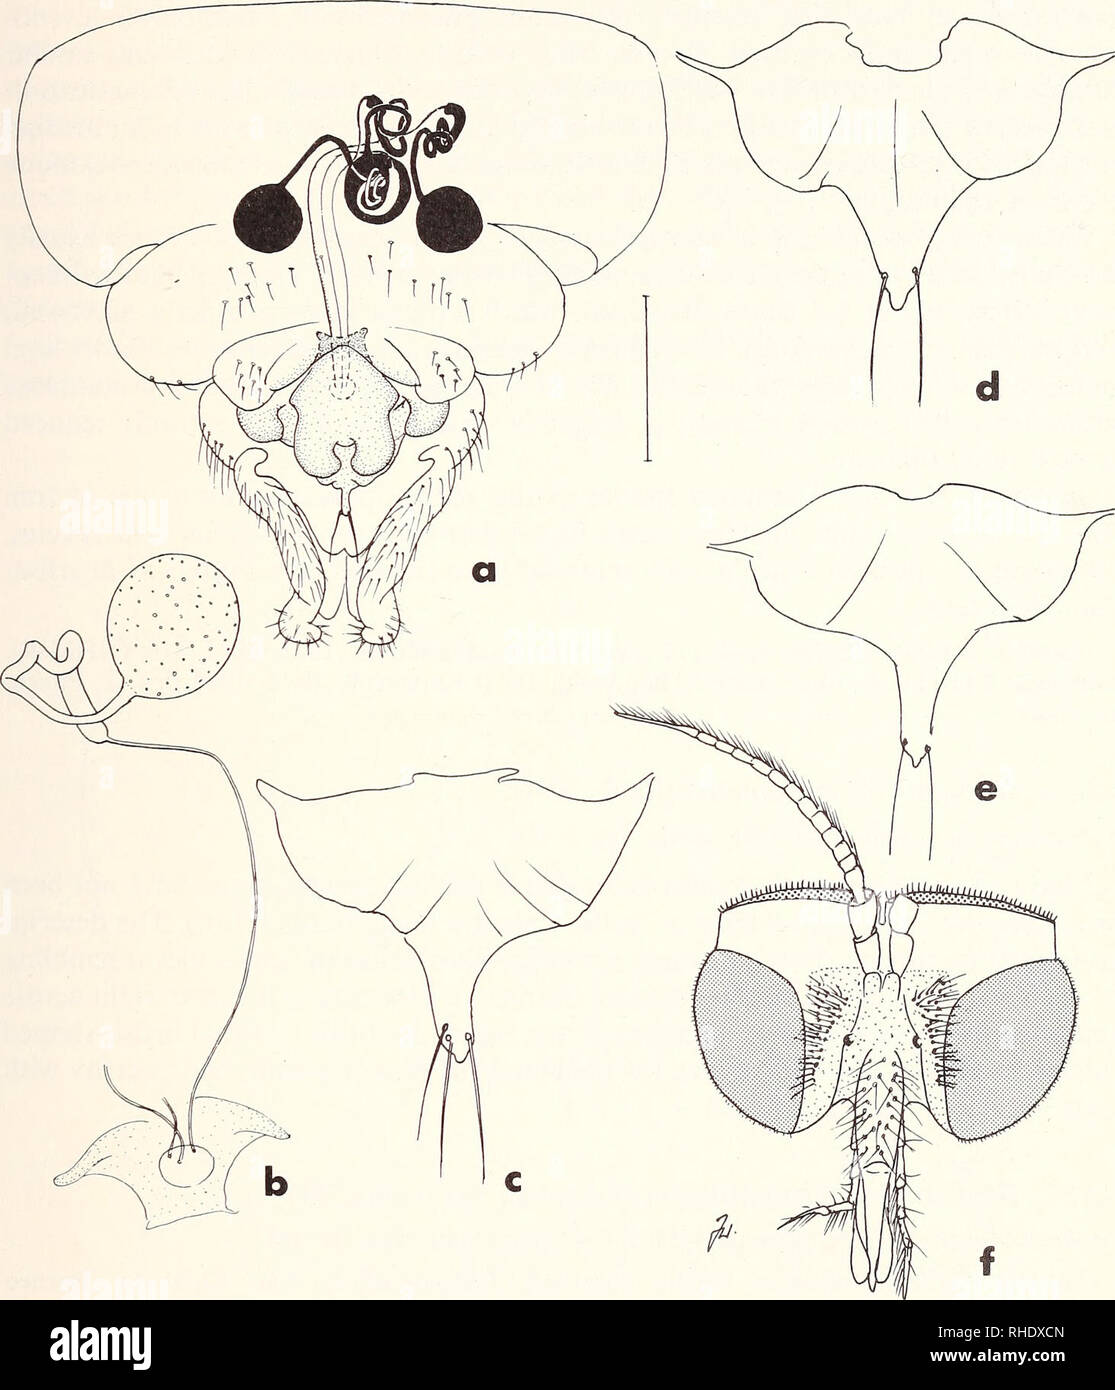 . Bonner zoologische Beiträge : Herausgeber: Zoologisches Forschungsinstitut und Museum Alexander Koenig, Bonn. Biology; Zoology. Systematic notes on Holarctic Blephariceridae 247. Fig. 7: Blepharicera spp., females. — B. fasciata from Chios: a, cleared genitalia in ventral view, scale line is 0.3 mm; b, detail of one receptacle; c, genital fork; presence of 3 setae is an individual aberration. — Genital forks of B. asiática (d; from Rampur) and B. indica (e, from Polonnaruwa). — B. tetrophthalma, head of holotype, f. 4.3.2.5. Blepharicera fasciata (Westw^ood, 1842) (Figs. 6k—m, 7a—c) Asthenia Stock Photo